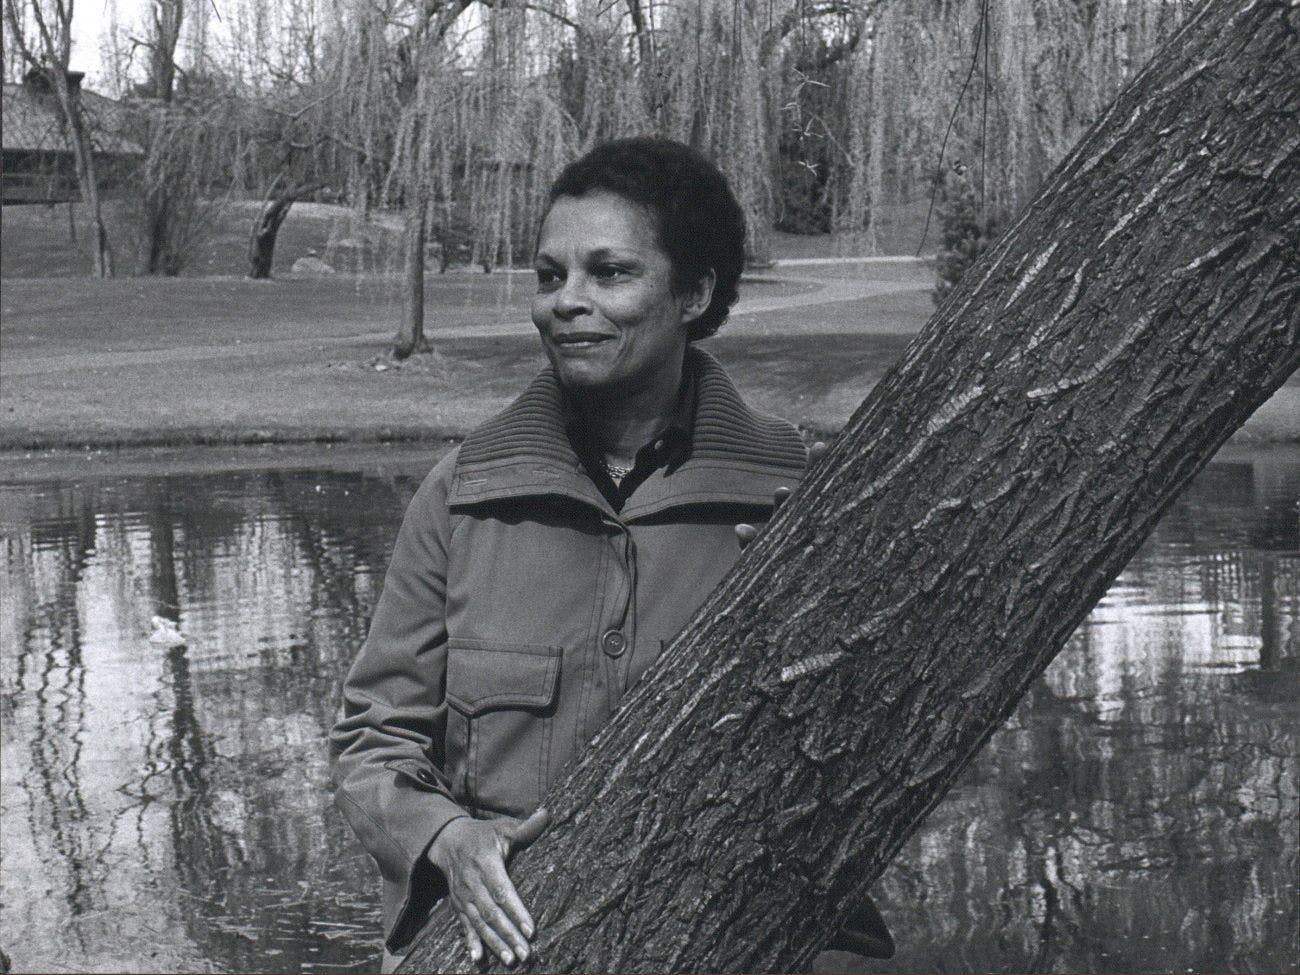 Gwendolyn Knight stands near a tree in a park